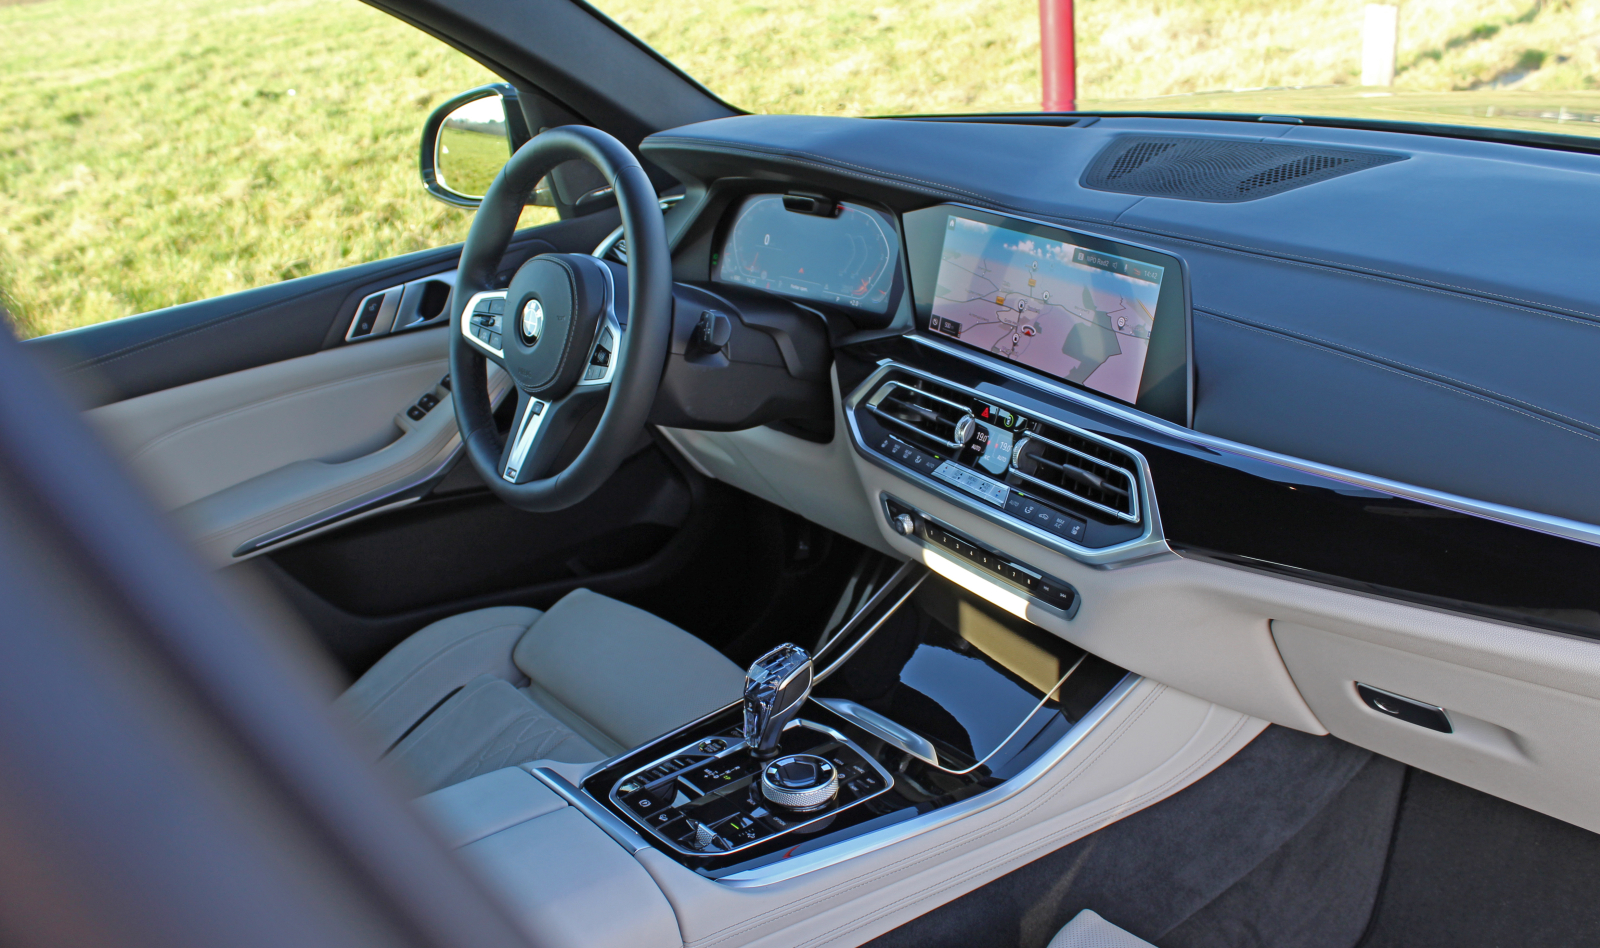 BMW Operating System 7.0 - Infotainment Review